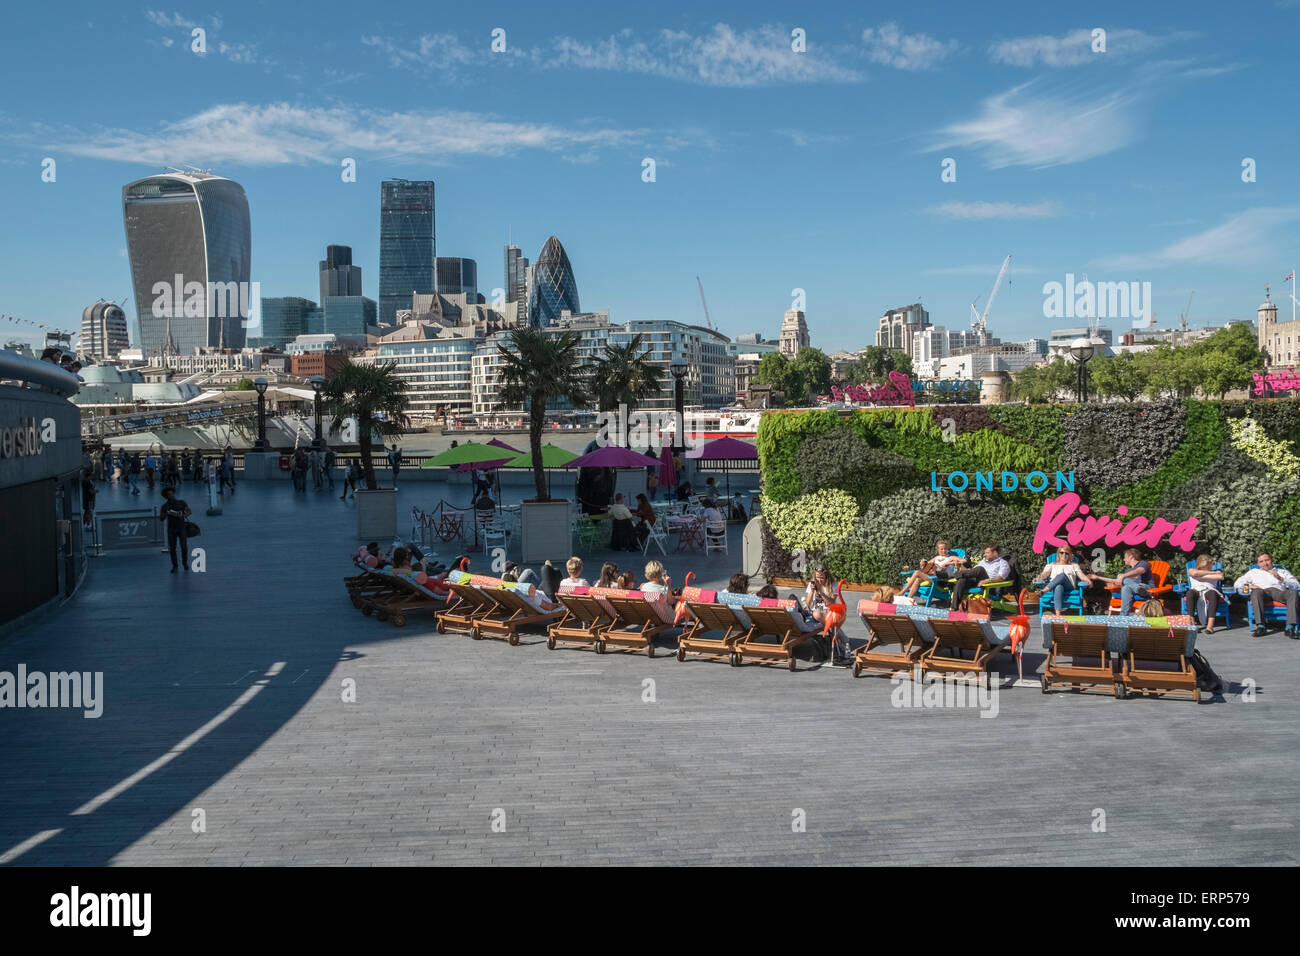 People relaxing in sunshine at London Riviera, with modern skyline architecture in background, Southbank, Southwark, UK Stock Photo